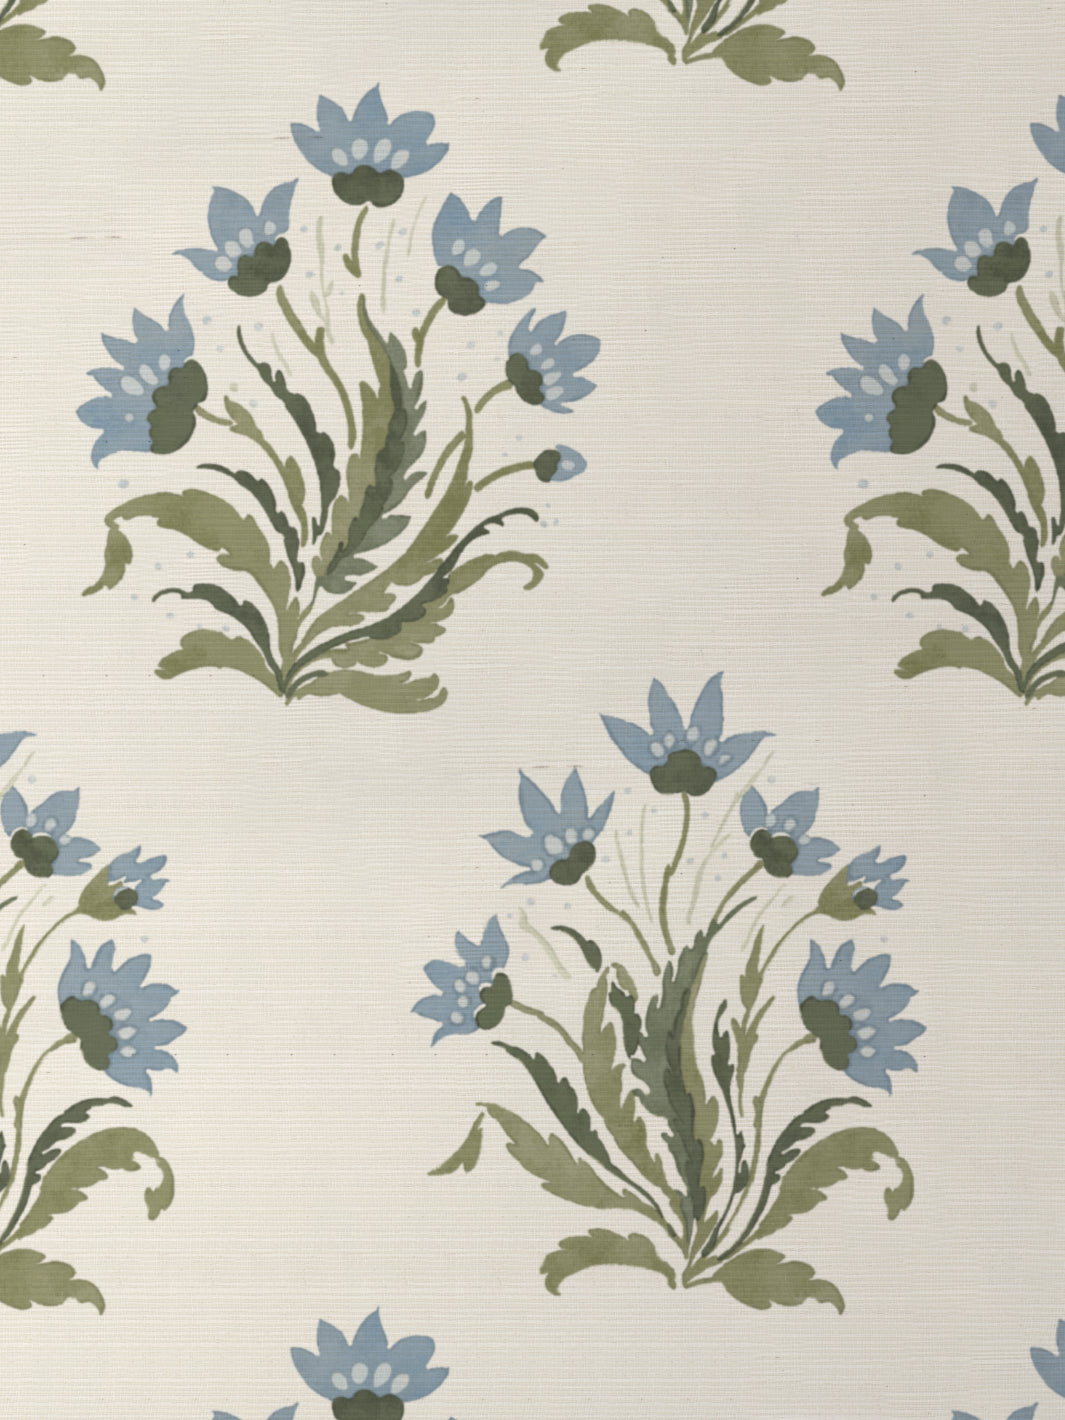 'Hillhouse Block Print Large' Grasscloth Wallpaper by Nathan Turner - Blue Green